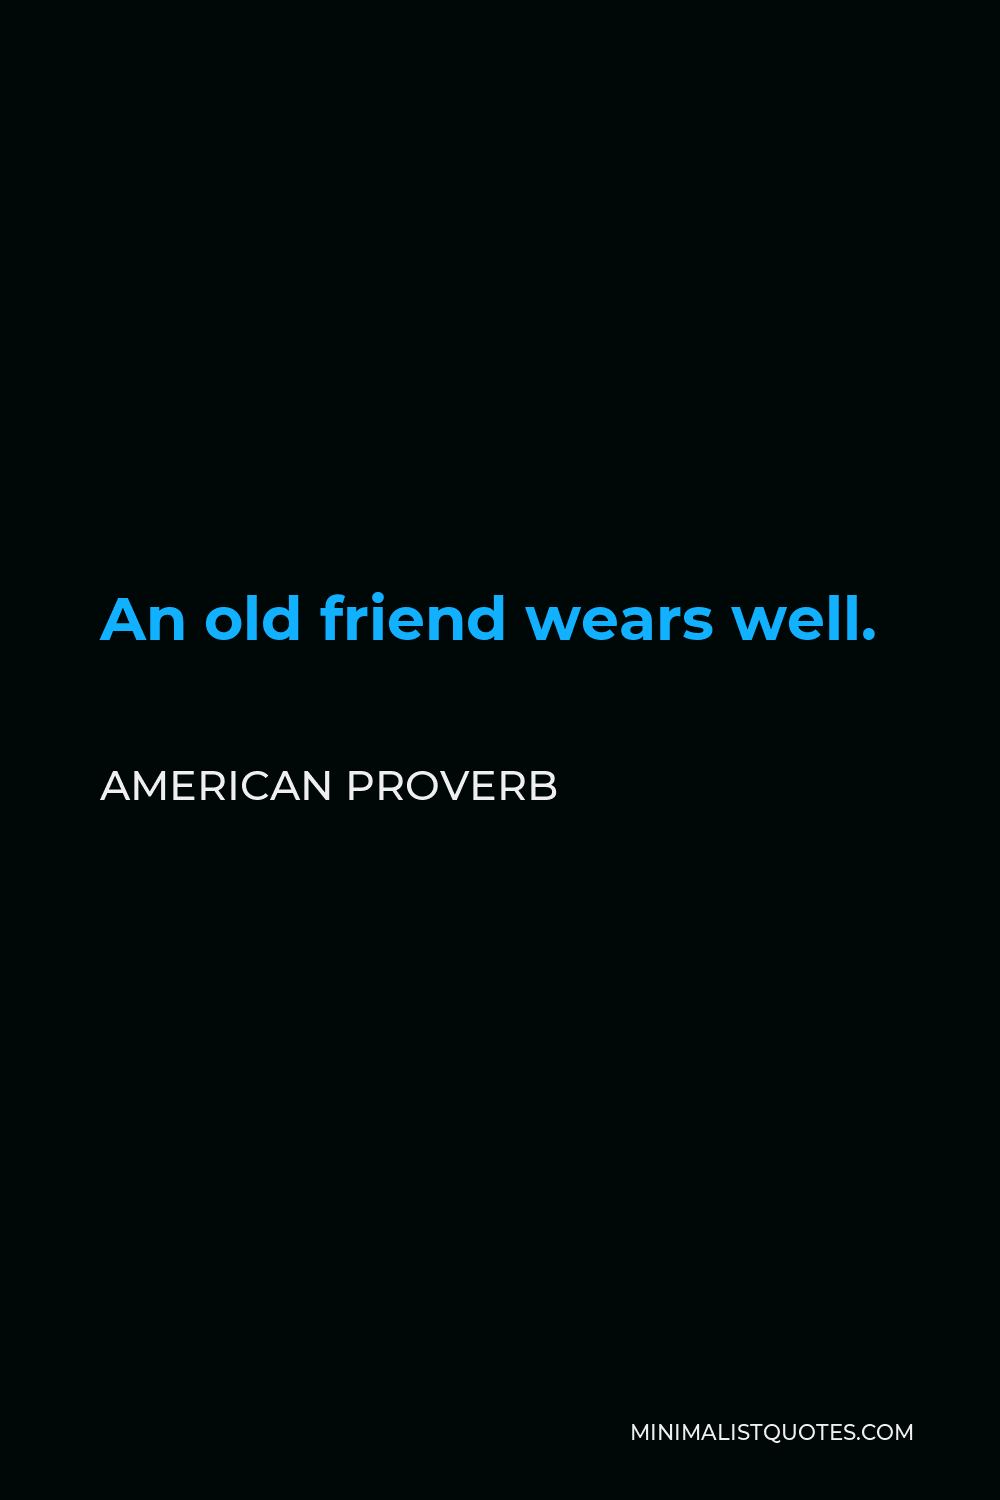 American Proverb Quote - An old friend wears well.